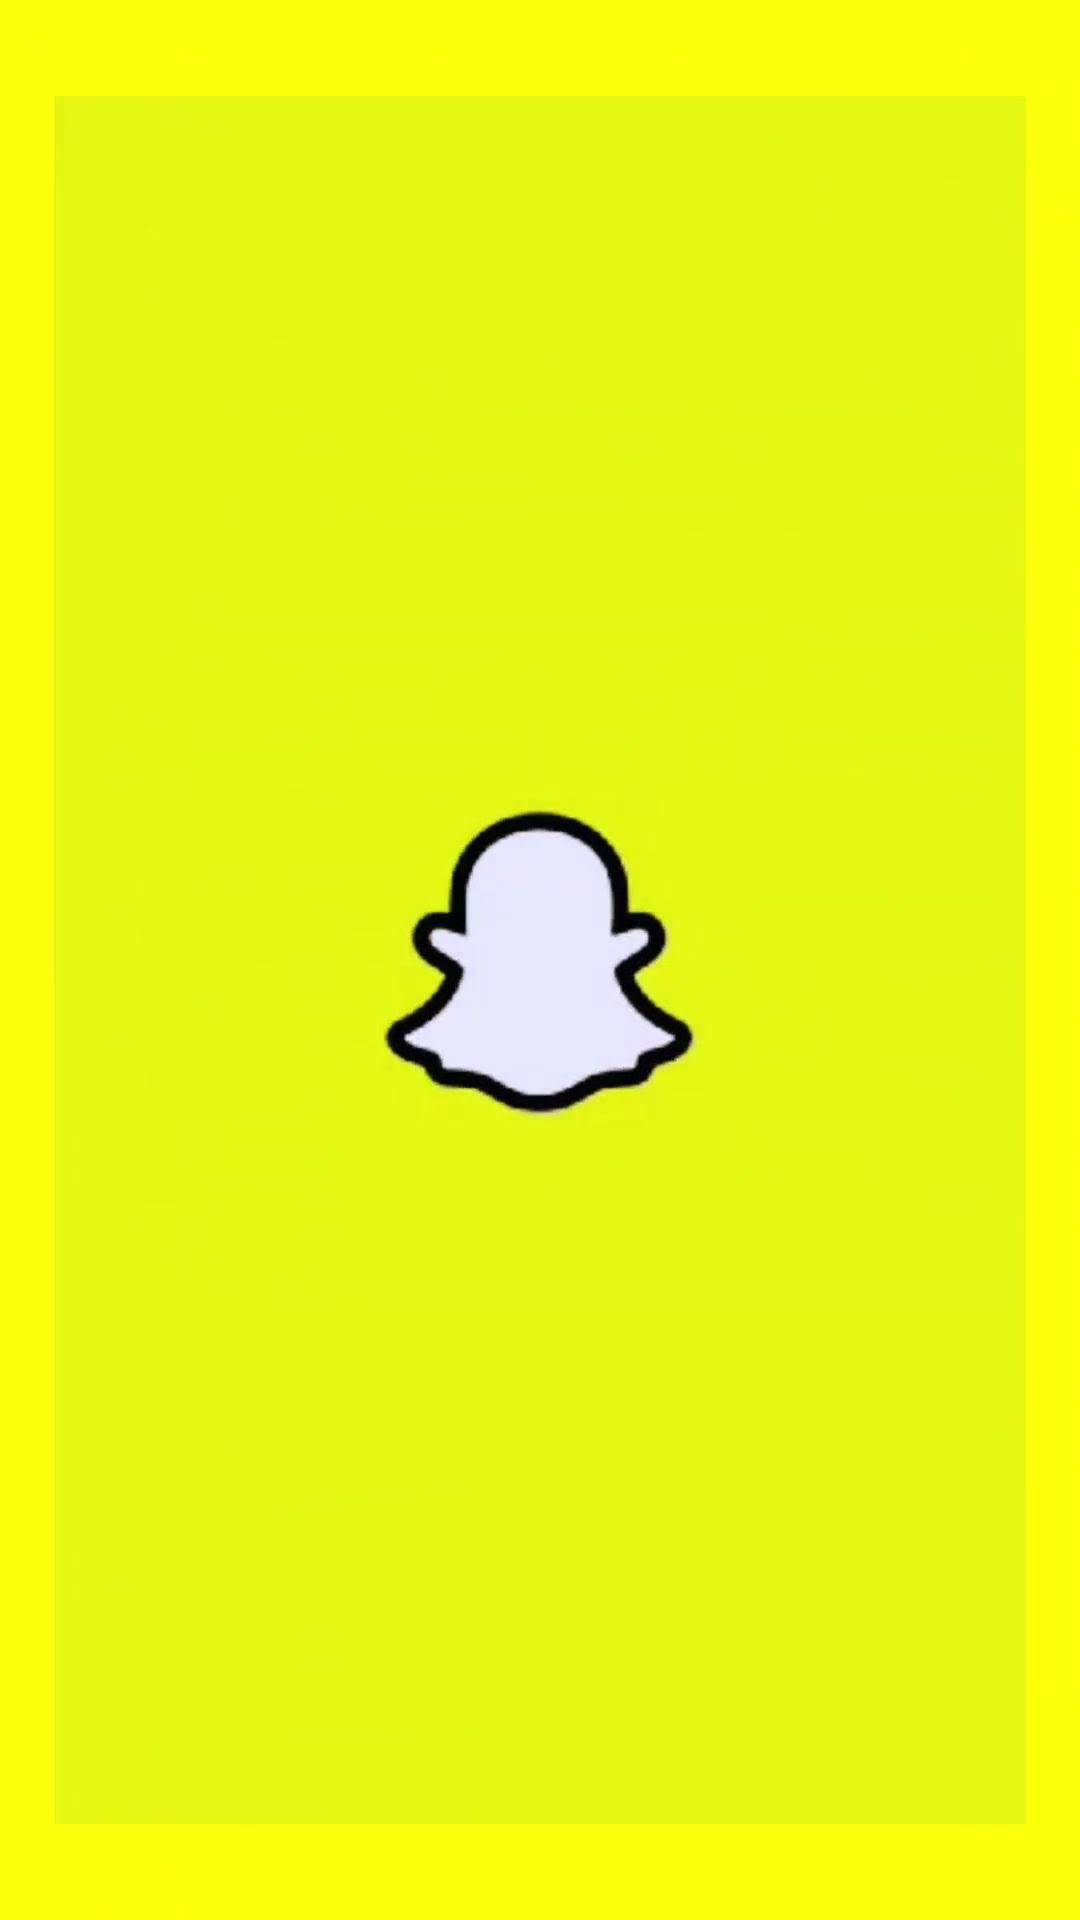 How to Change Language on Snapchat on Android Device